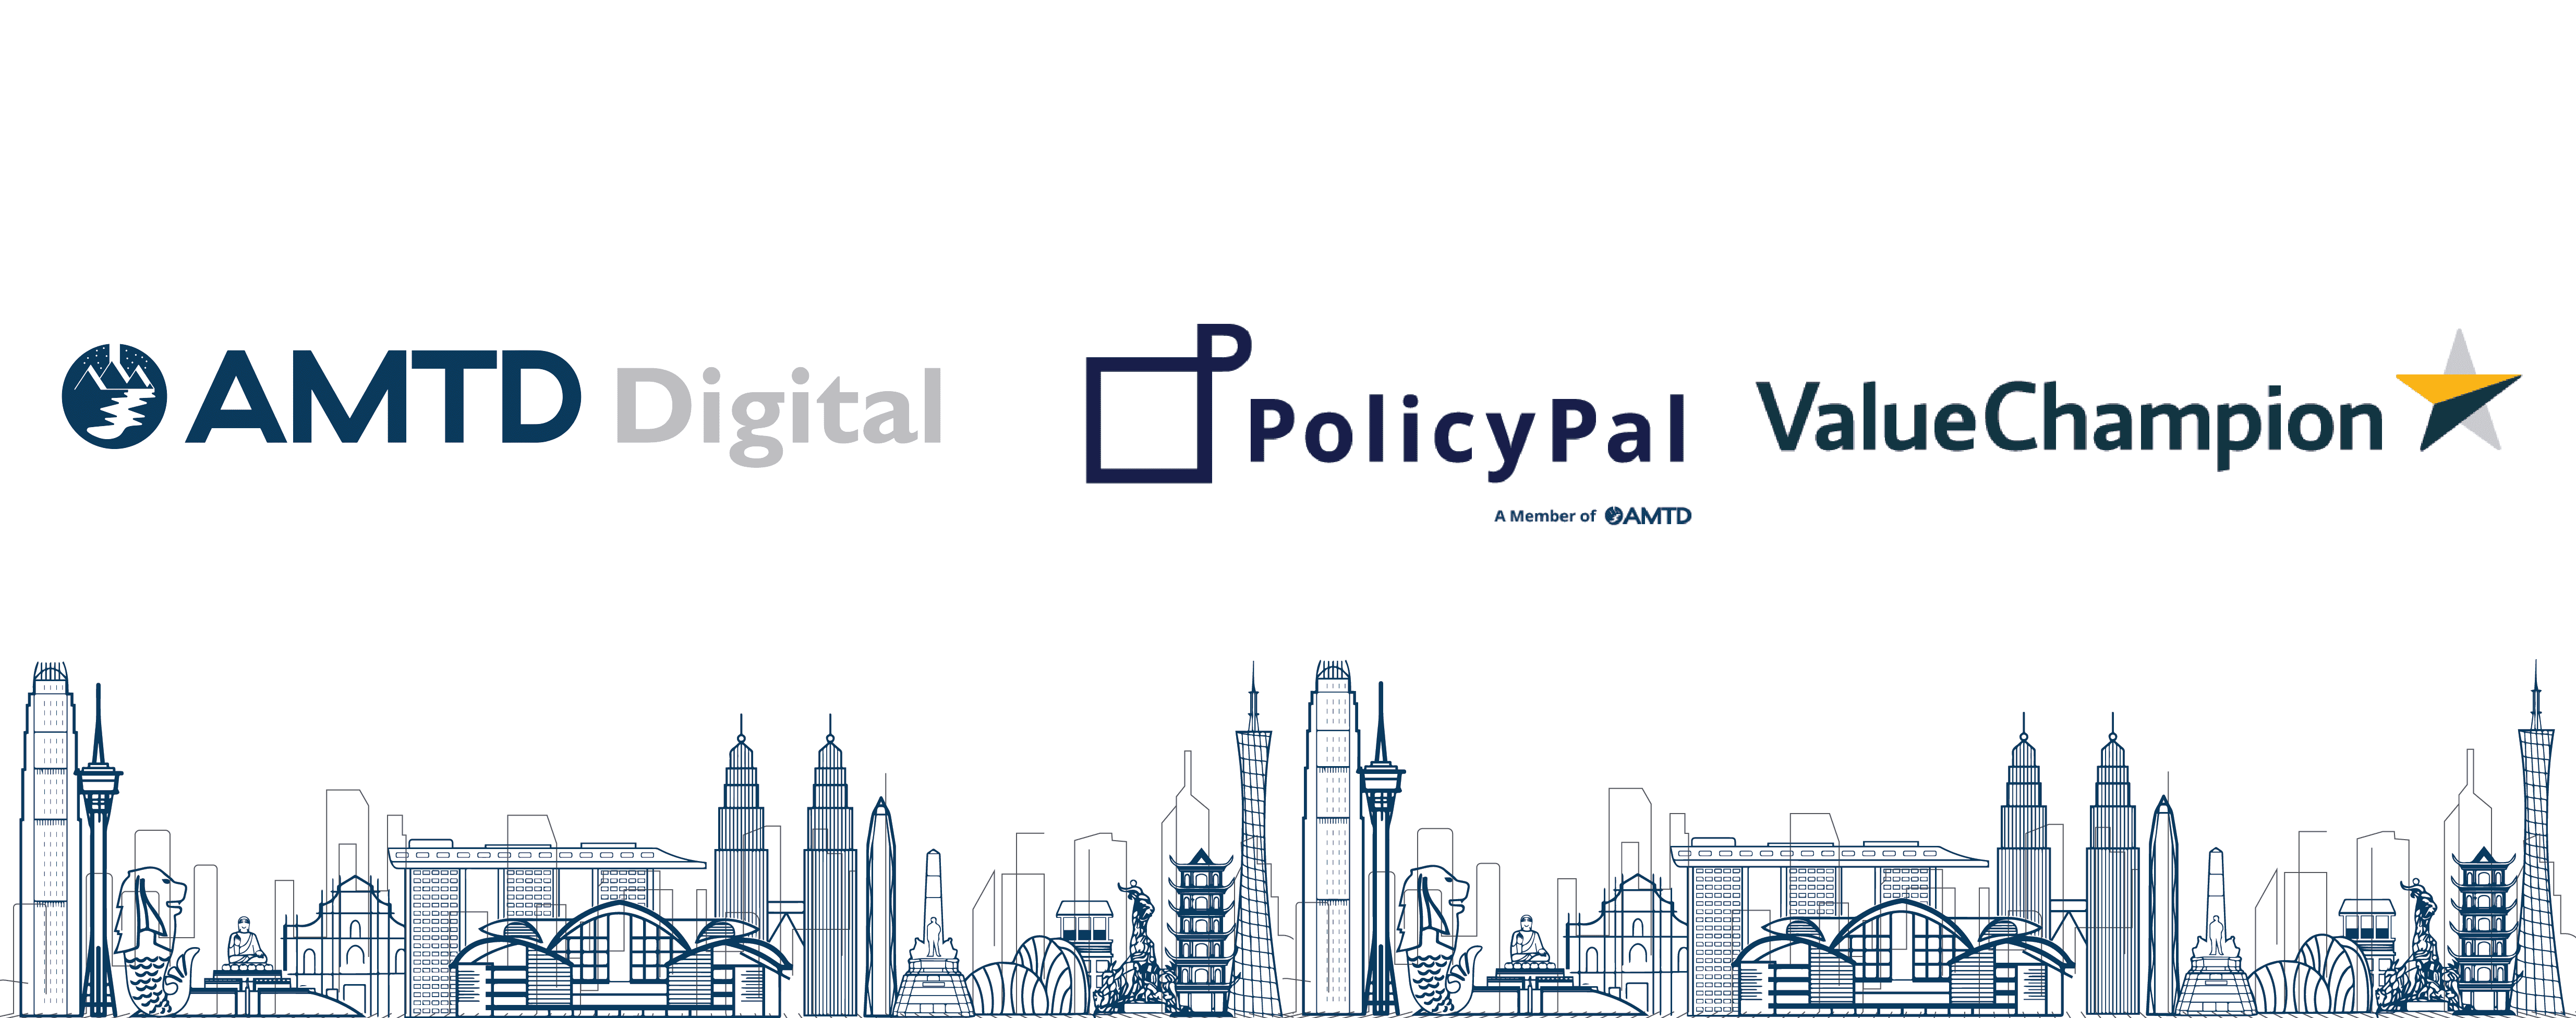 AMTD Digital’s PolicyPal acquires Value Champion Asia as part of Insurtech Expansion plans in Asia